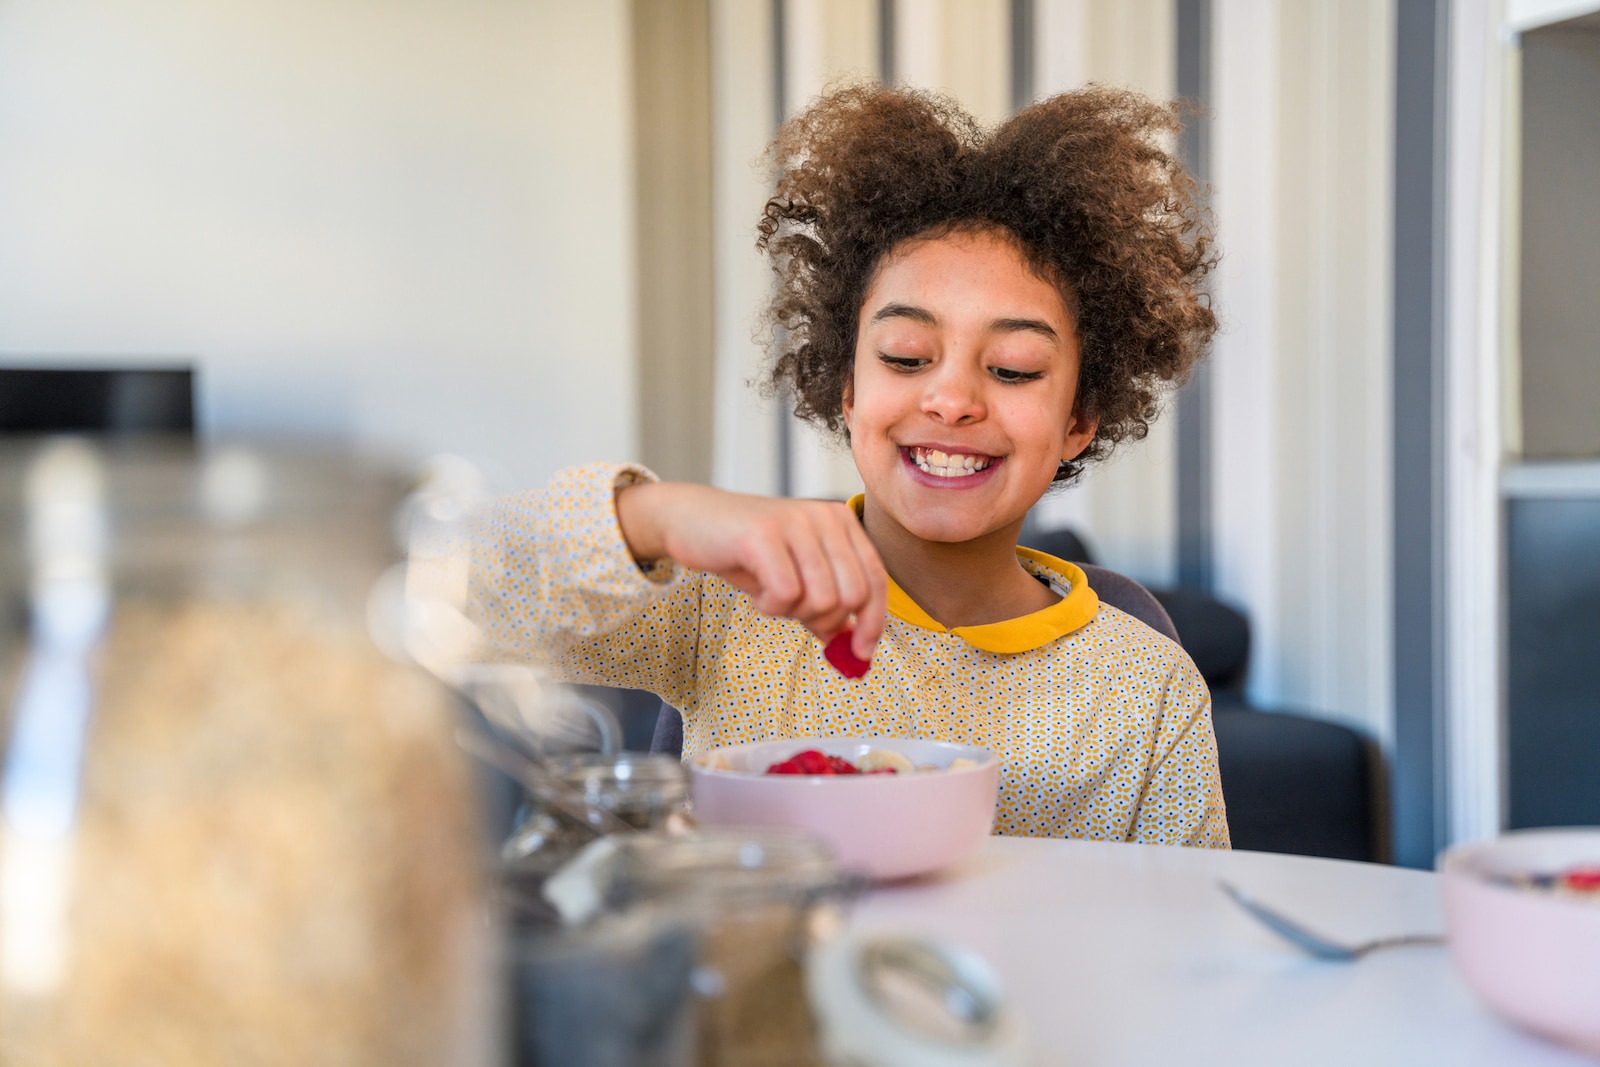 20 easy breakfast ideas for kids to make themselves